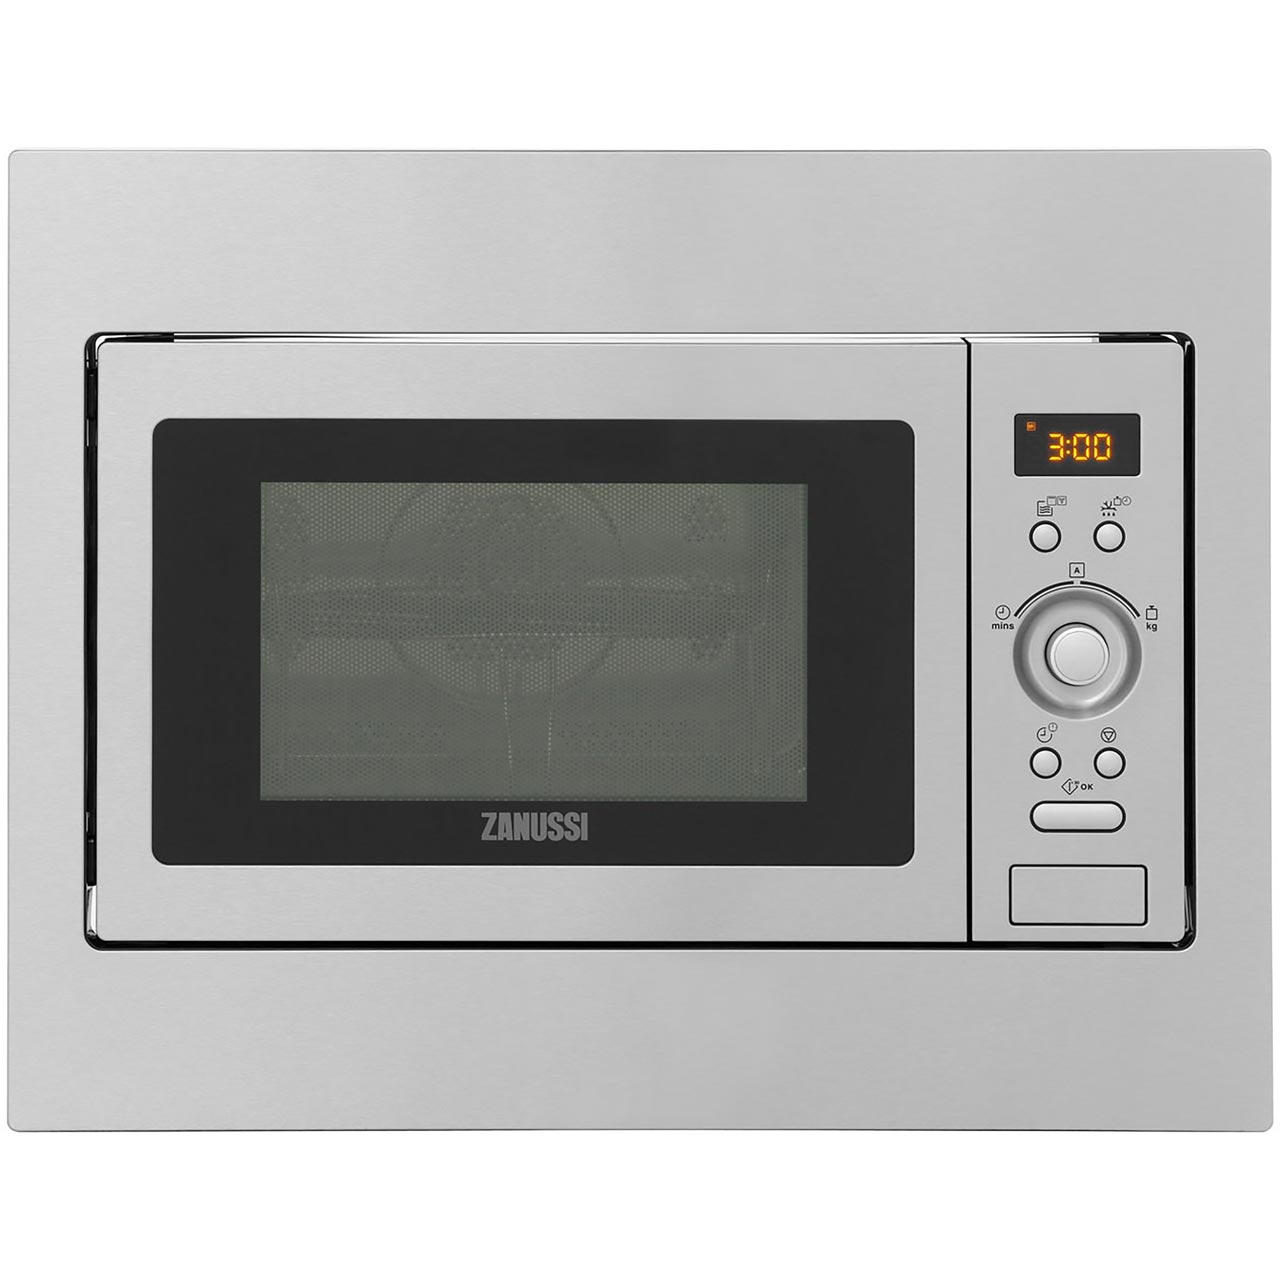 Zanussi ZSC25259XA Built In Combination Microwave Oven Review